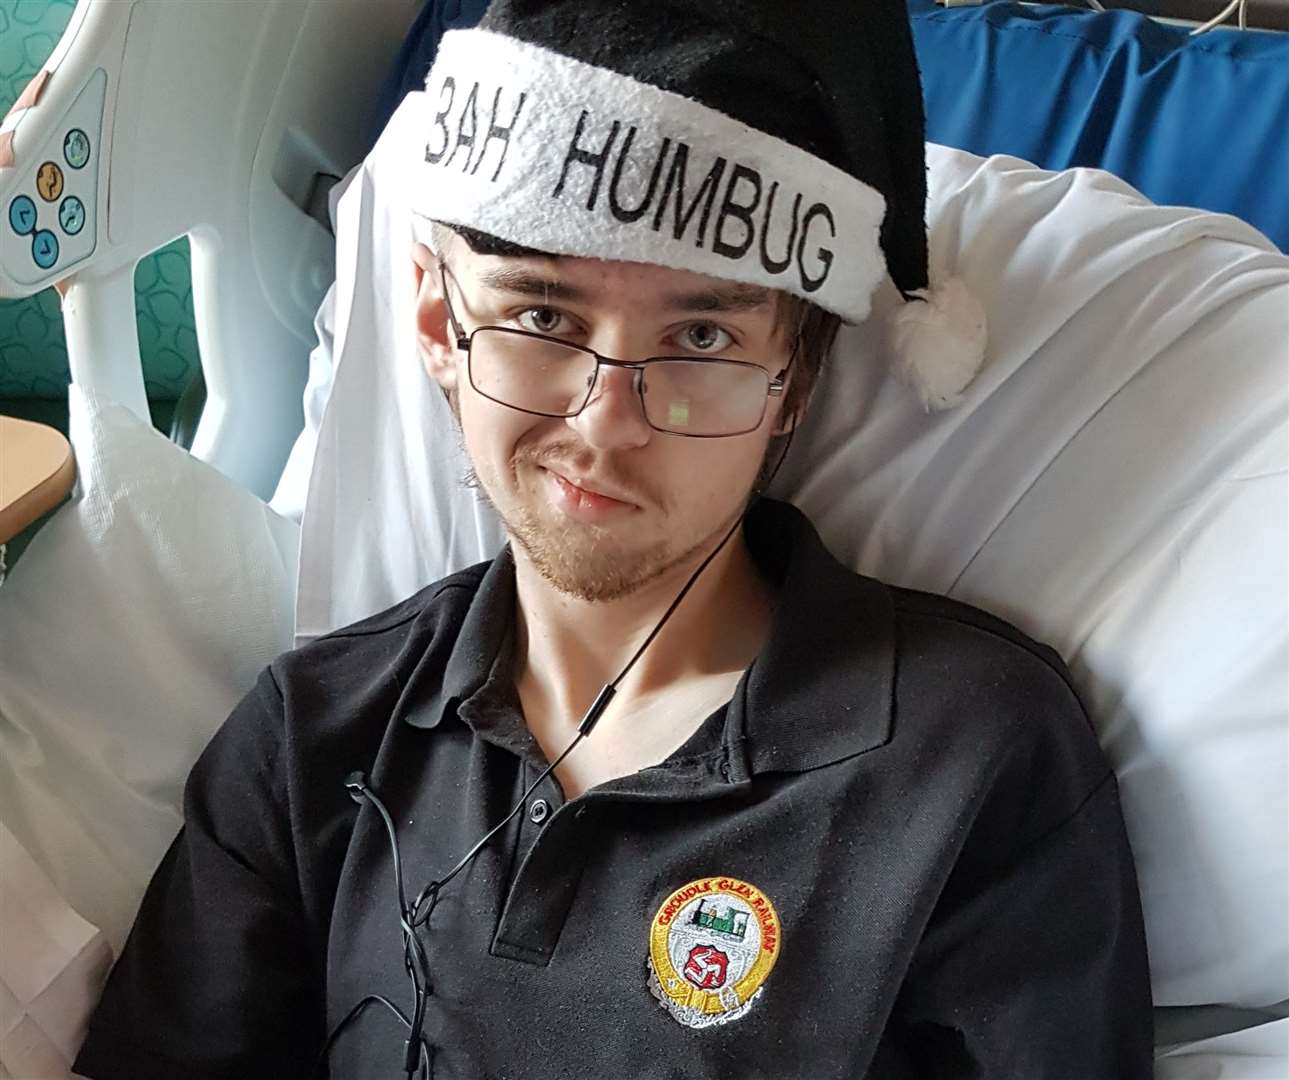 Sam and mum Heather spent Christmas at King's College Hospital in London as he continued to recover